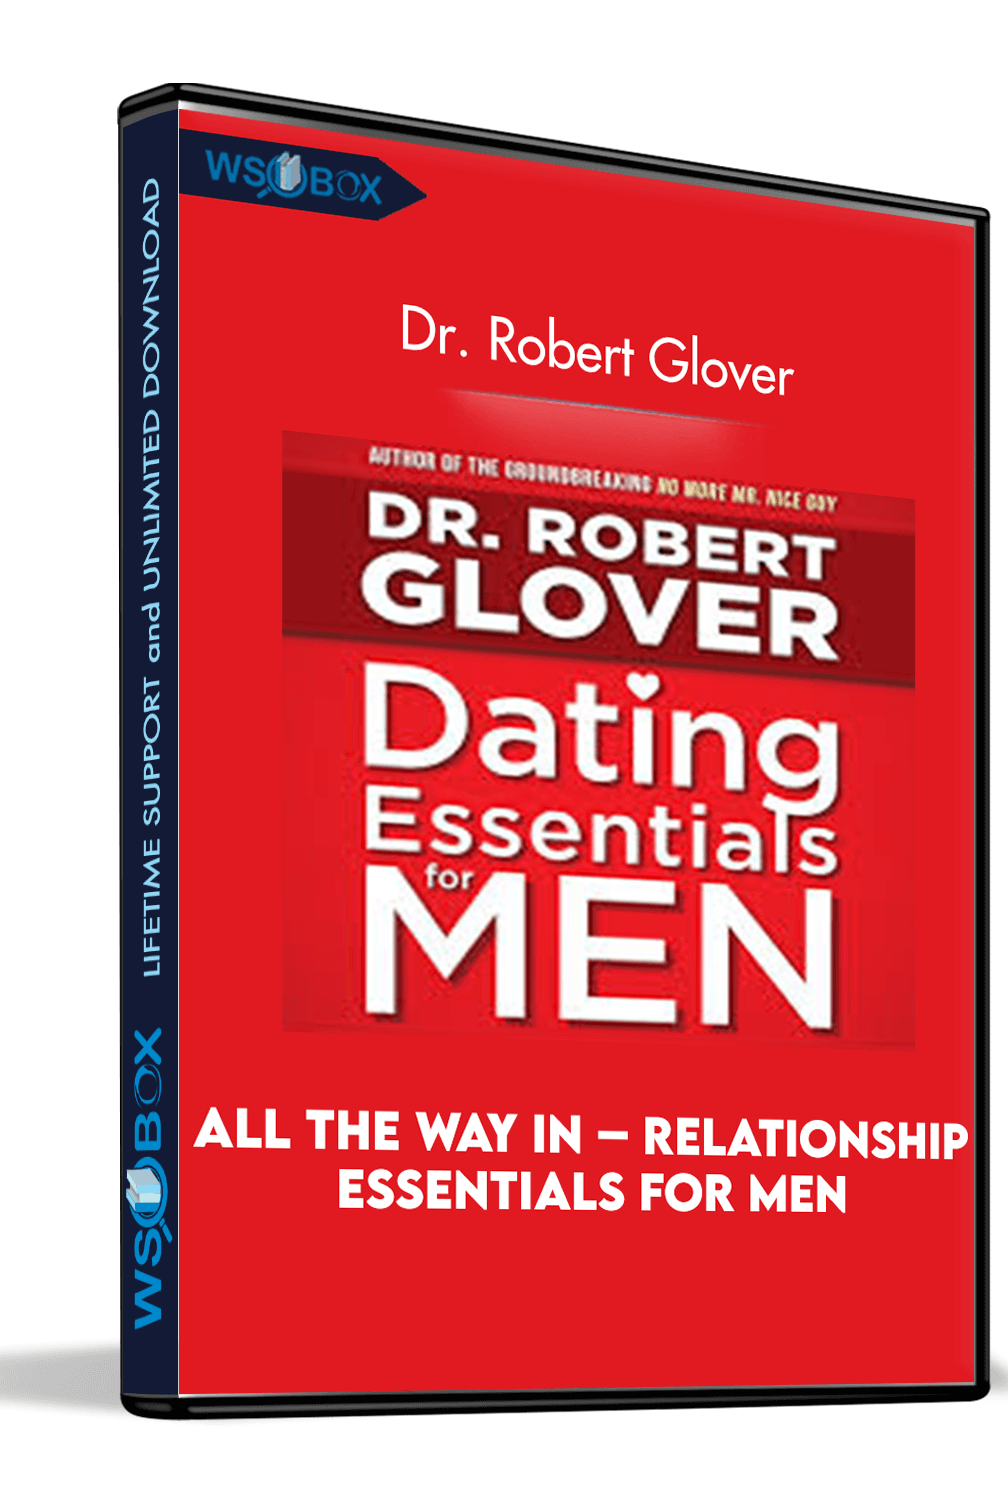 all-the-way-in-relationship-essentials-for-men-dr-robert-glover